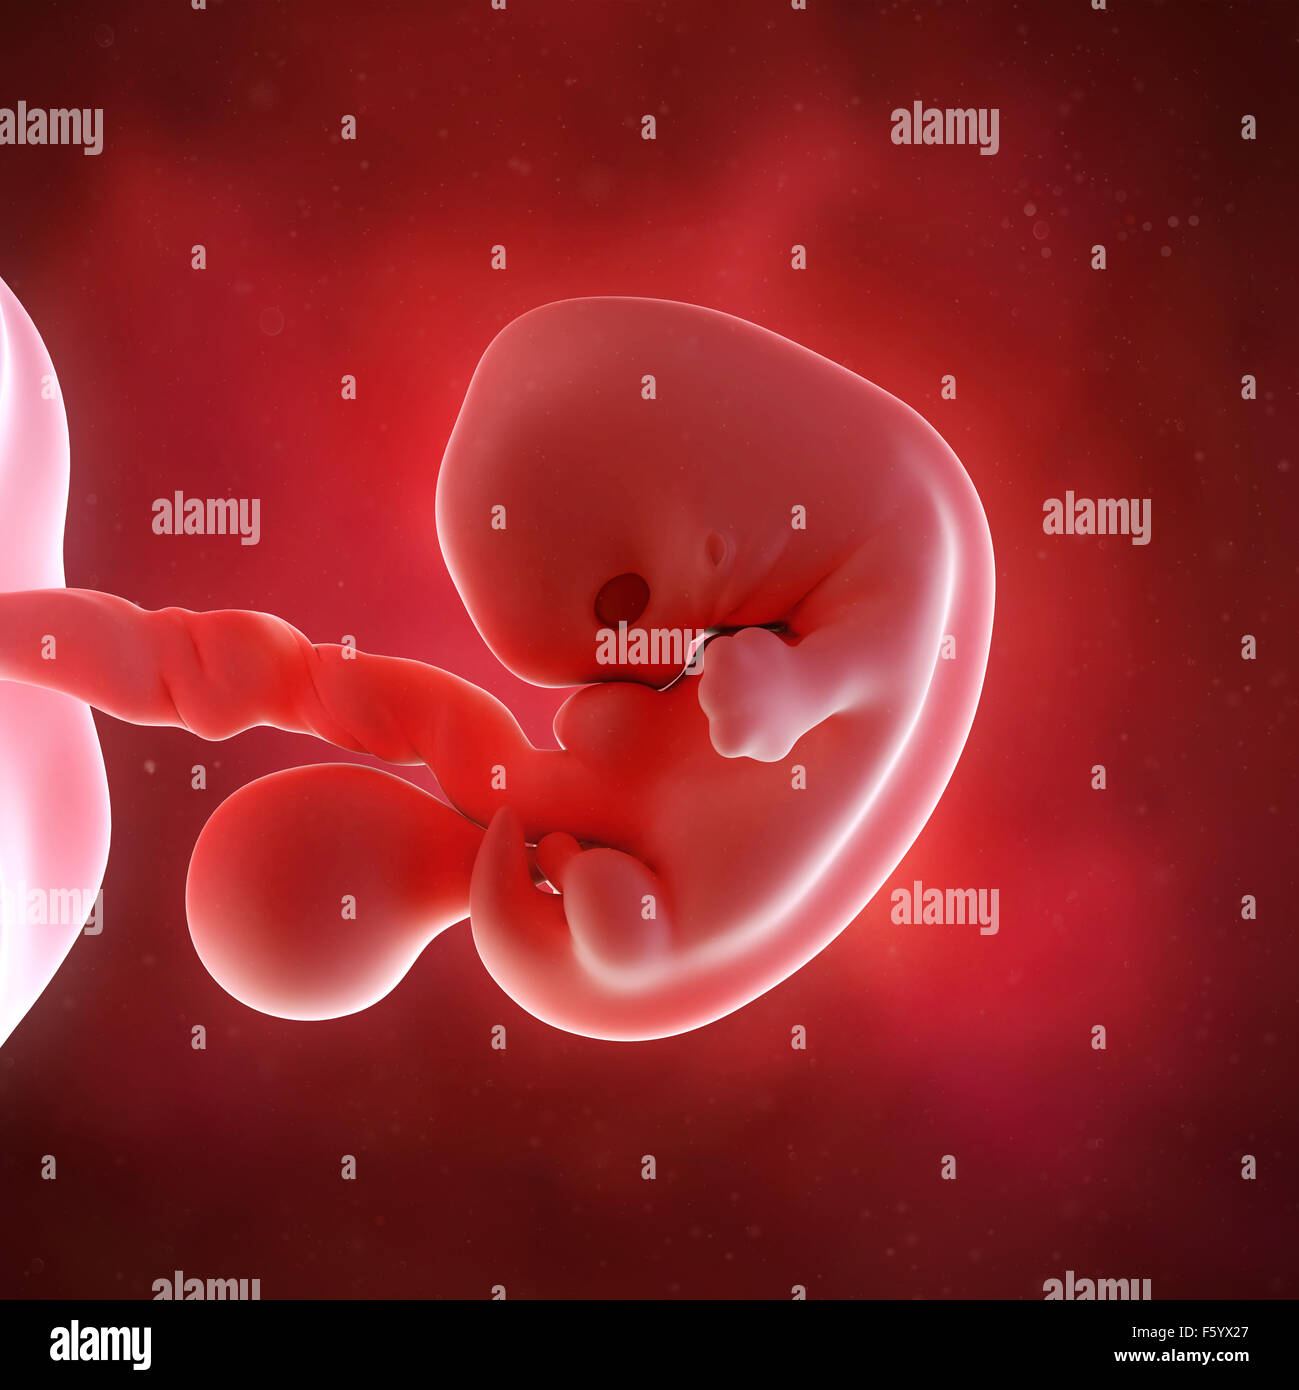 medical accurate 3d illustration of a fetus week 7 Stock Photo